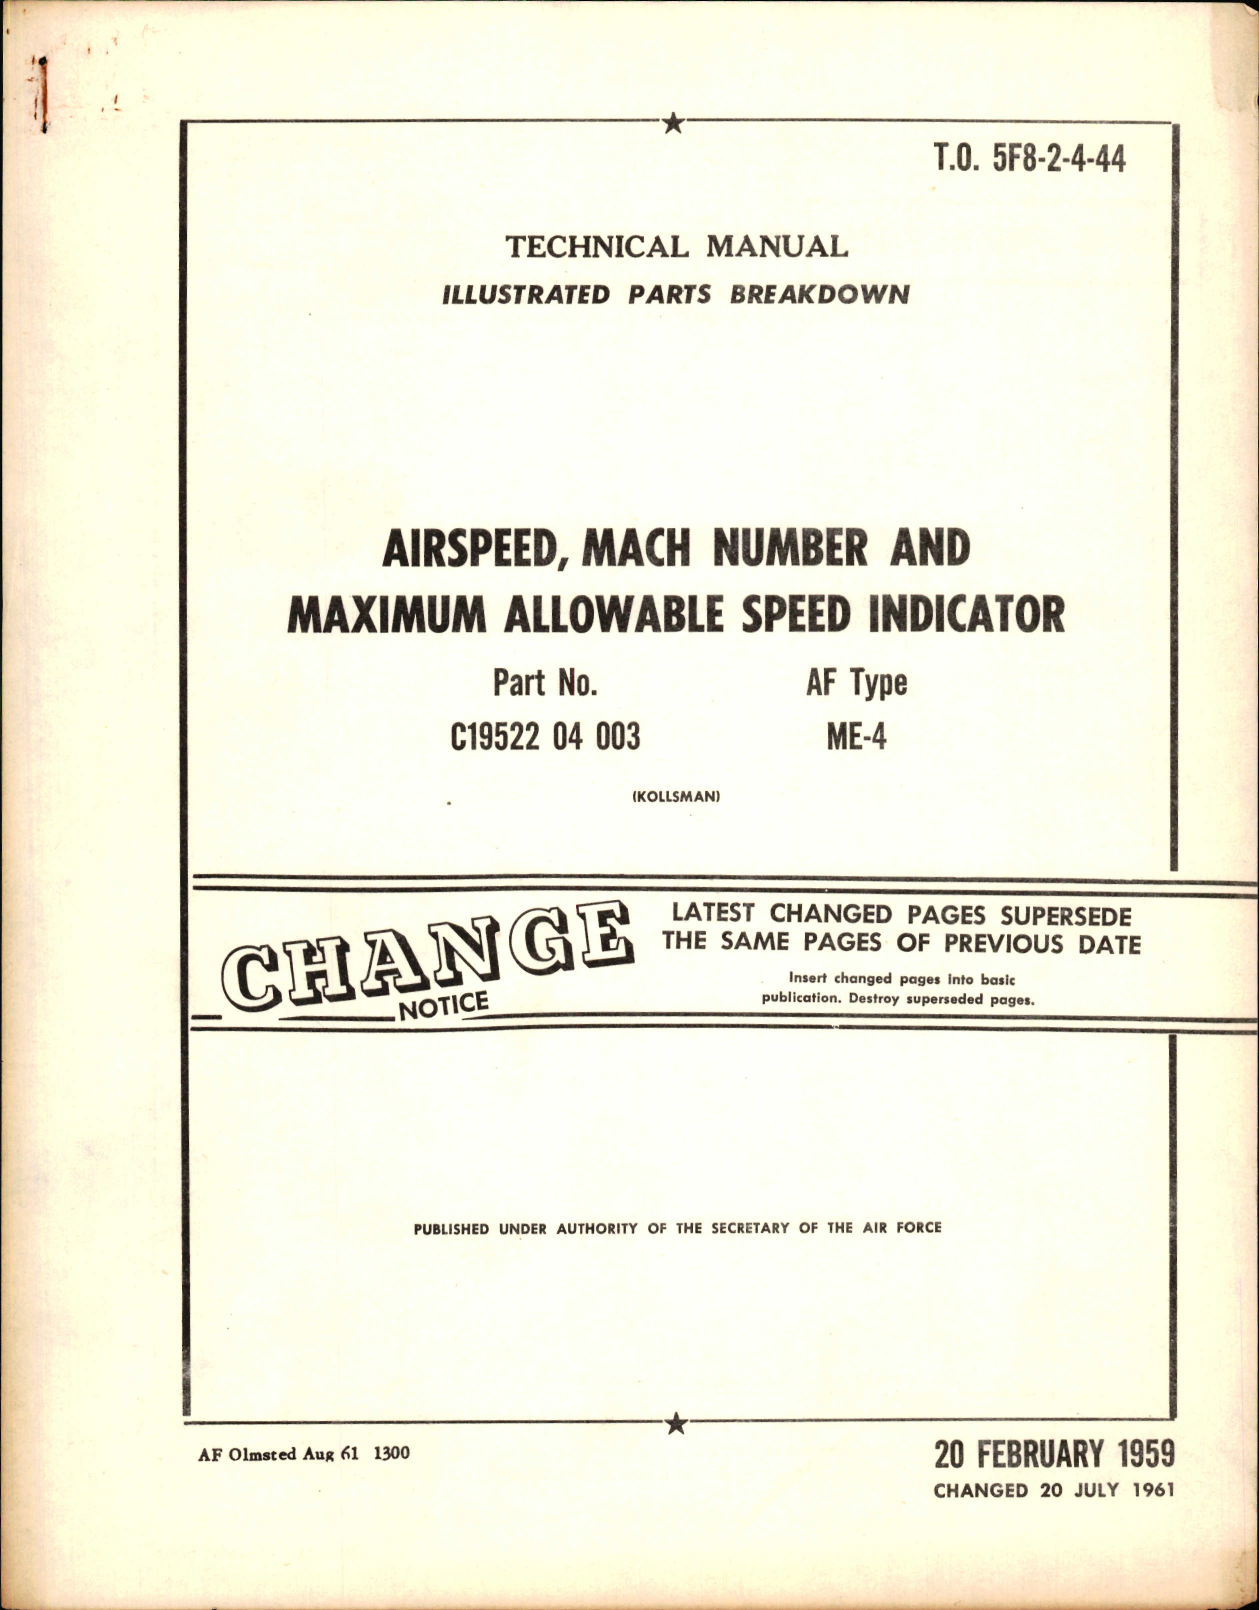 Sample page 1 from AirCorps Library document: Technical Manual with Illustrated Parts Breakdown for Airspeed, Mach Number and Maximum Allowable Speed Indicator